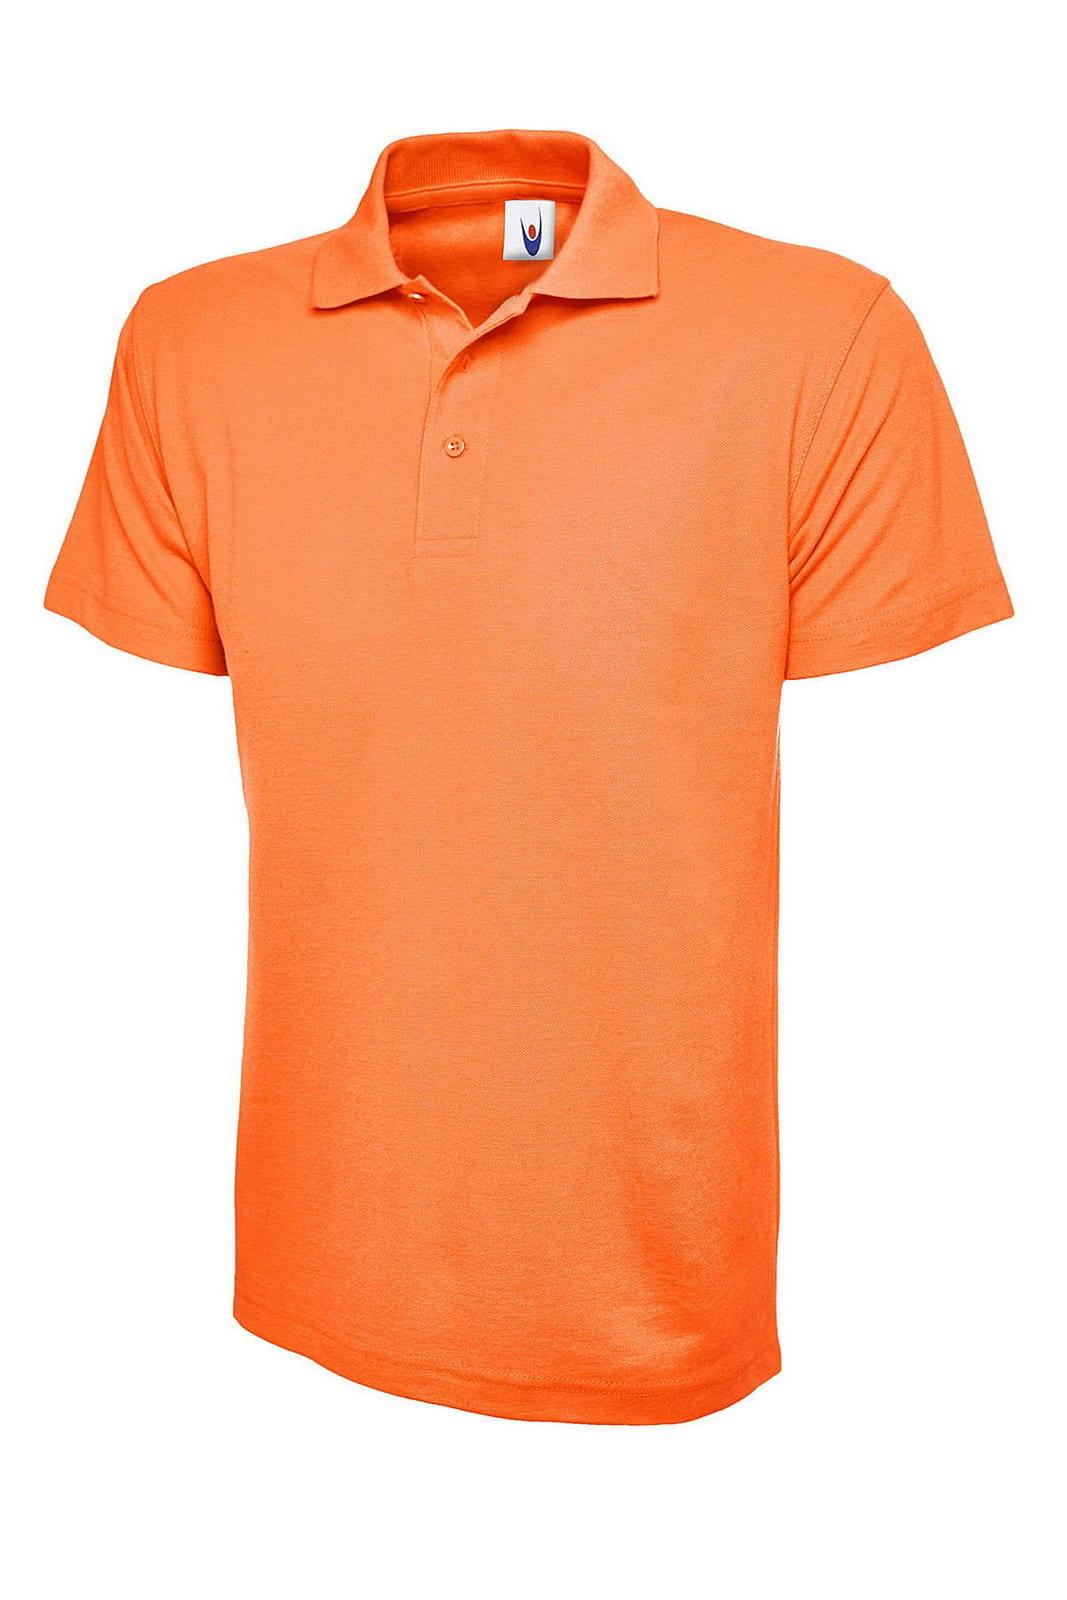 Uneek 220GSM Classic Polo Shirt in Orange (Product Code: UC101)